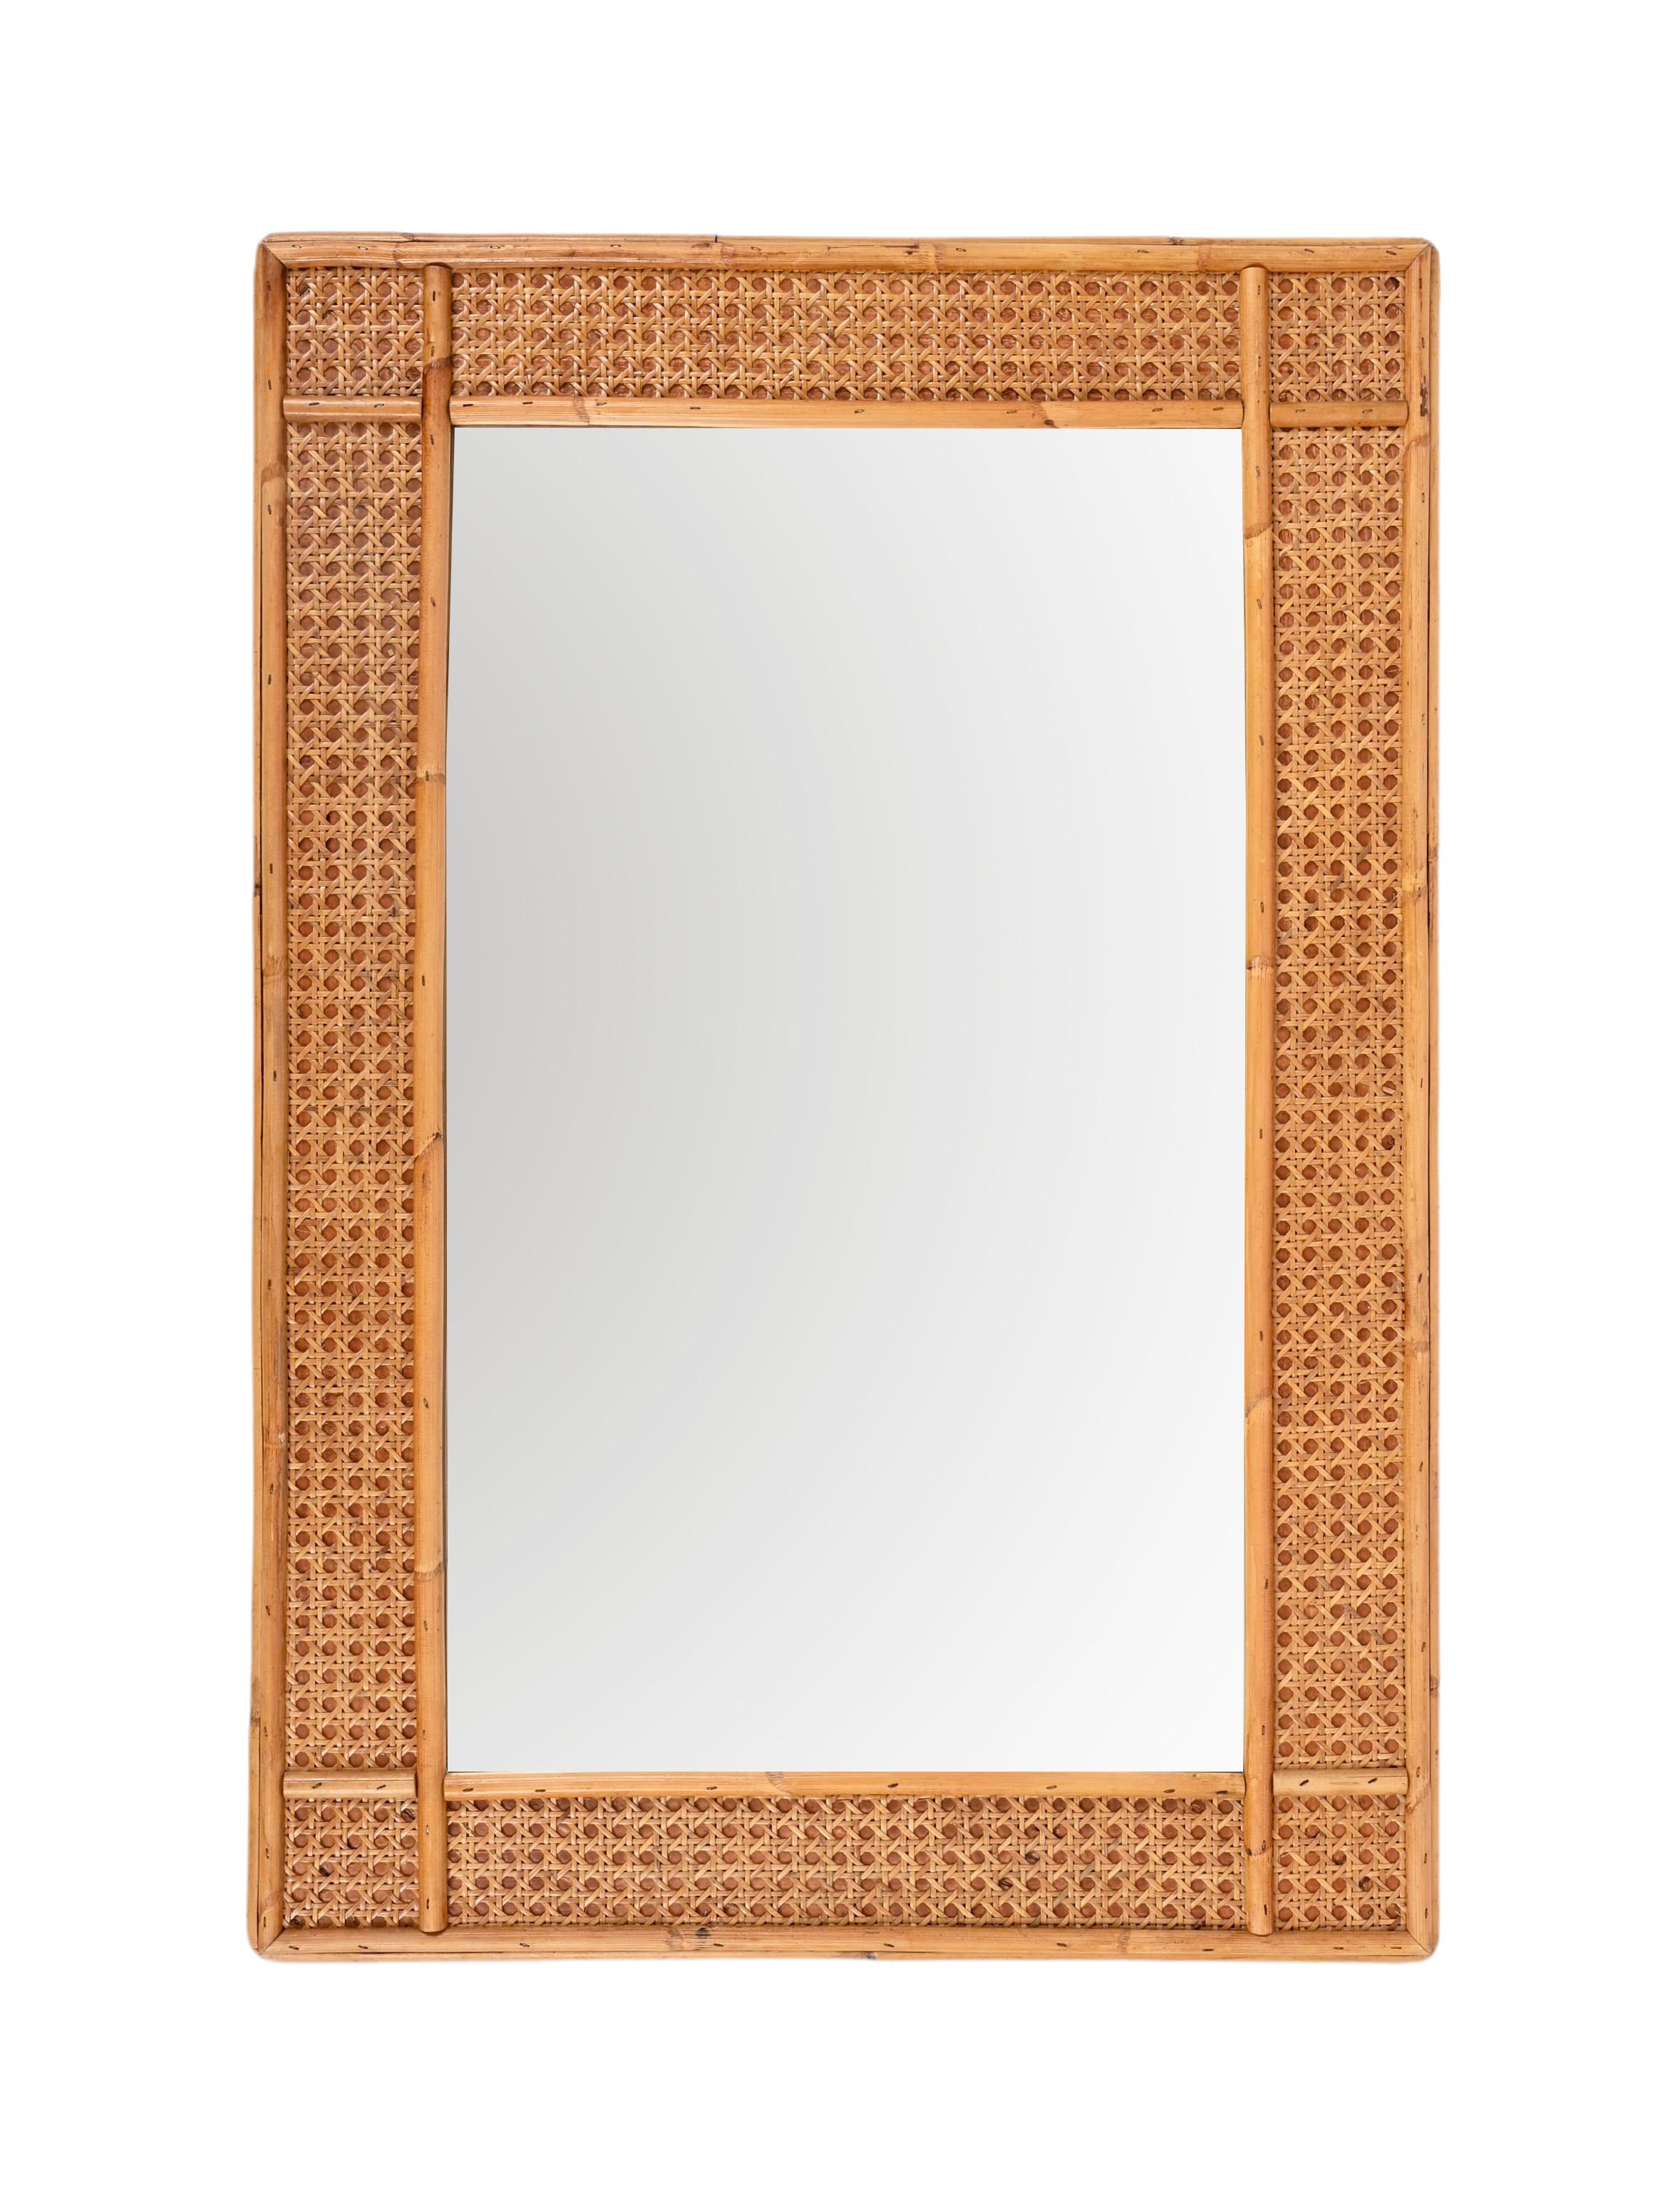 Spectacular midcentury rectangular bamboo and woven wicker mirror. This outstanding item was produced in Italy during the 1970s.

This piece is incredible thanks to its complex frame: it has an internal part made of a single bamboo cane, the